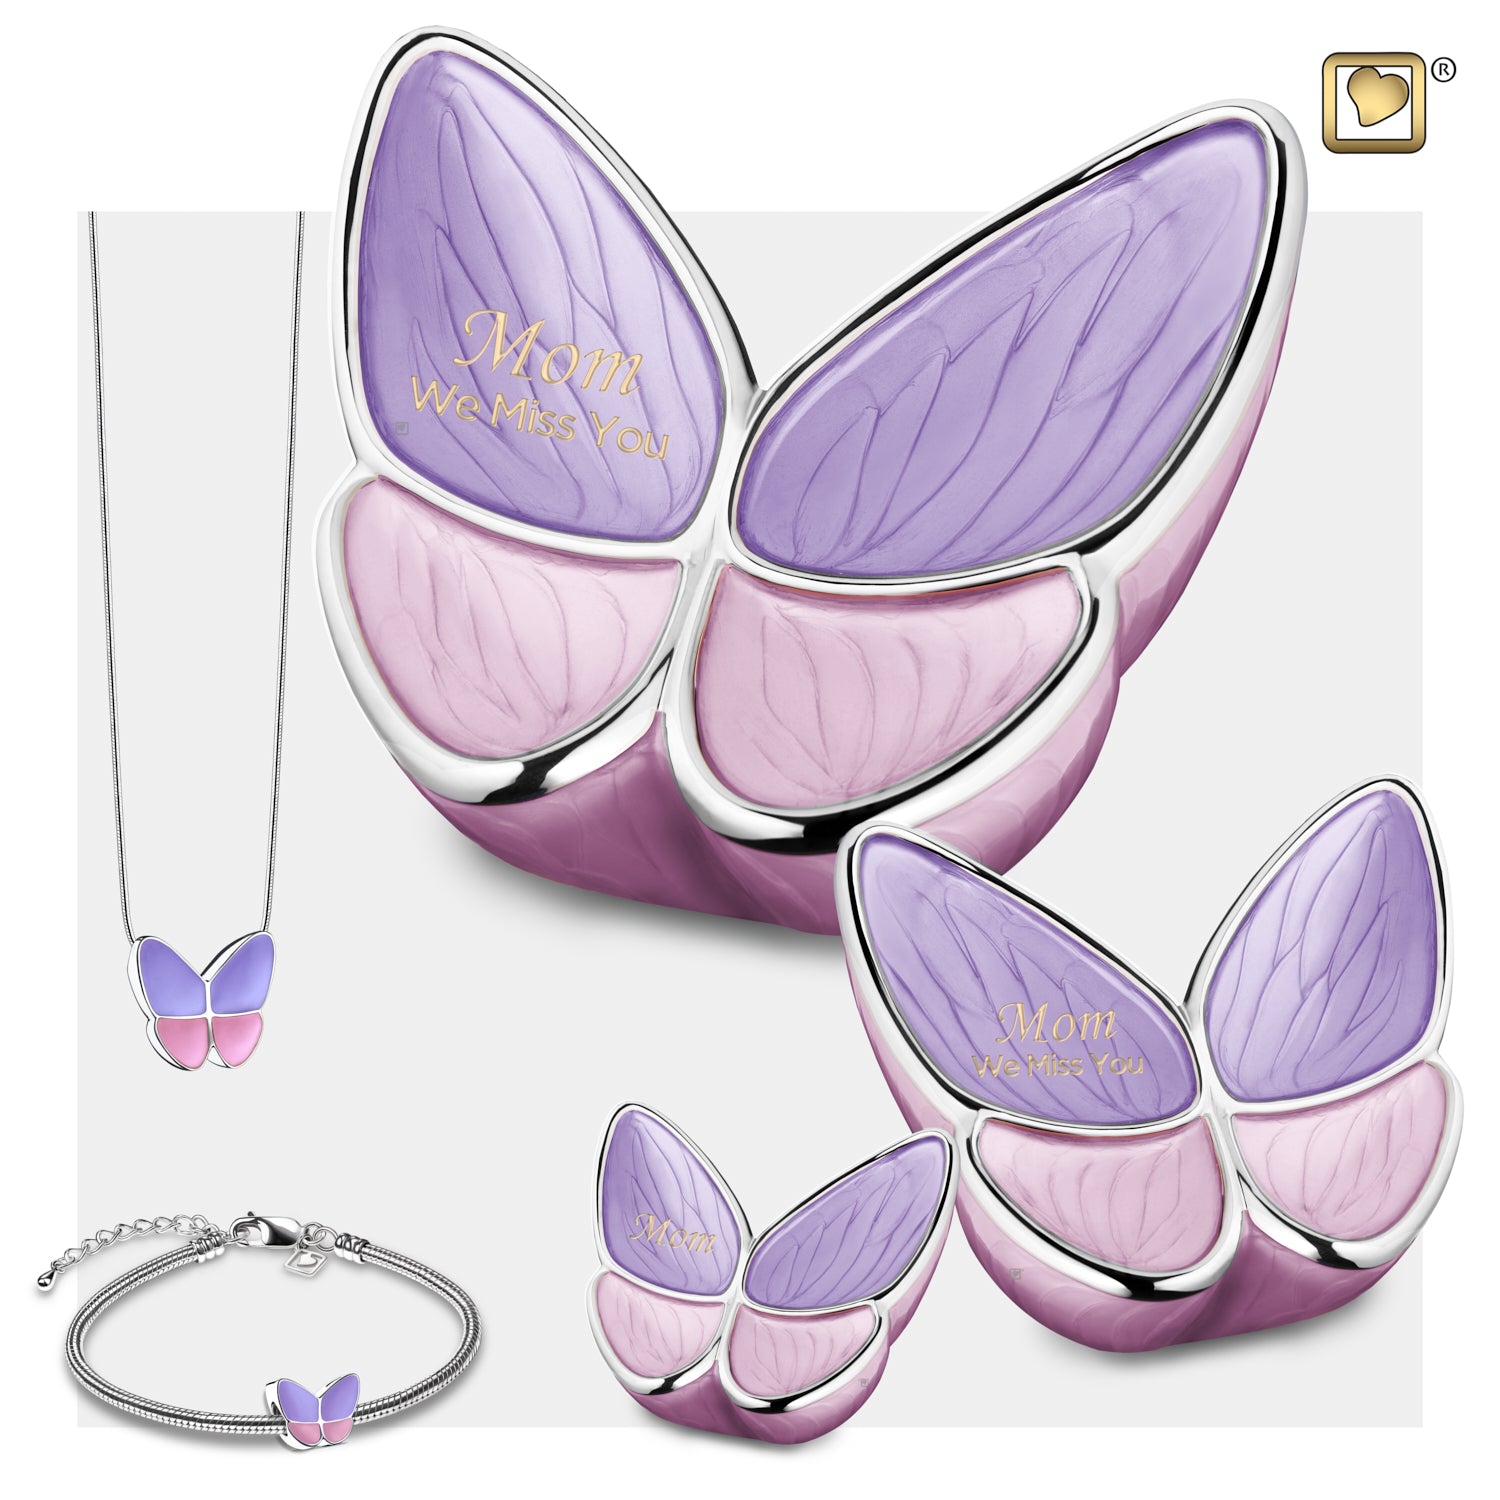 Butterfly Art with Name Meanings, Christian Research, 100s of Designs